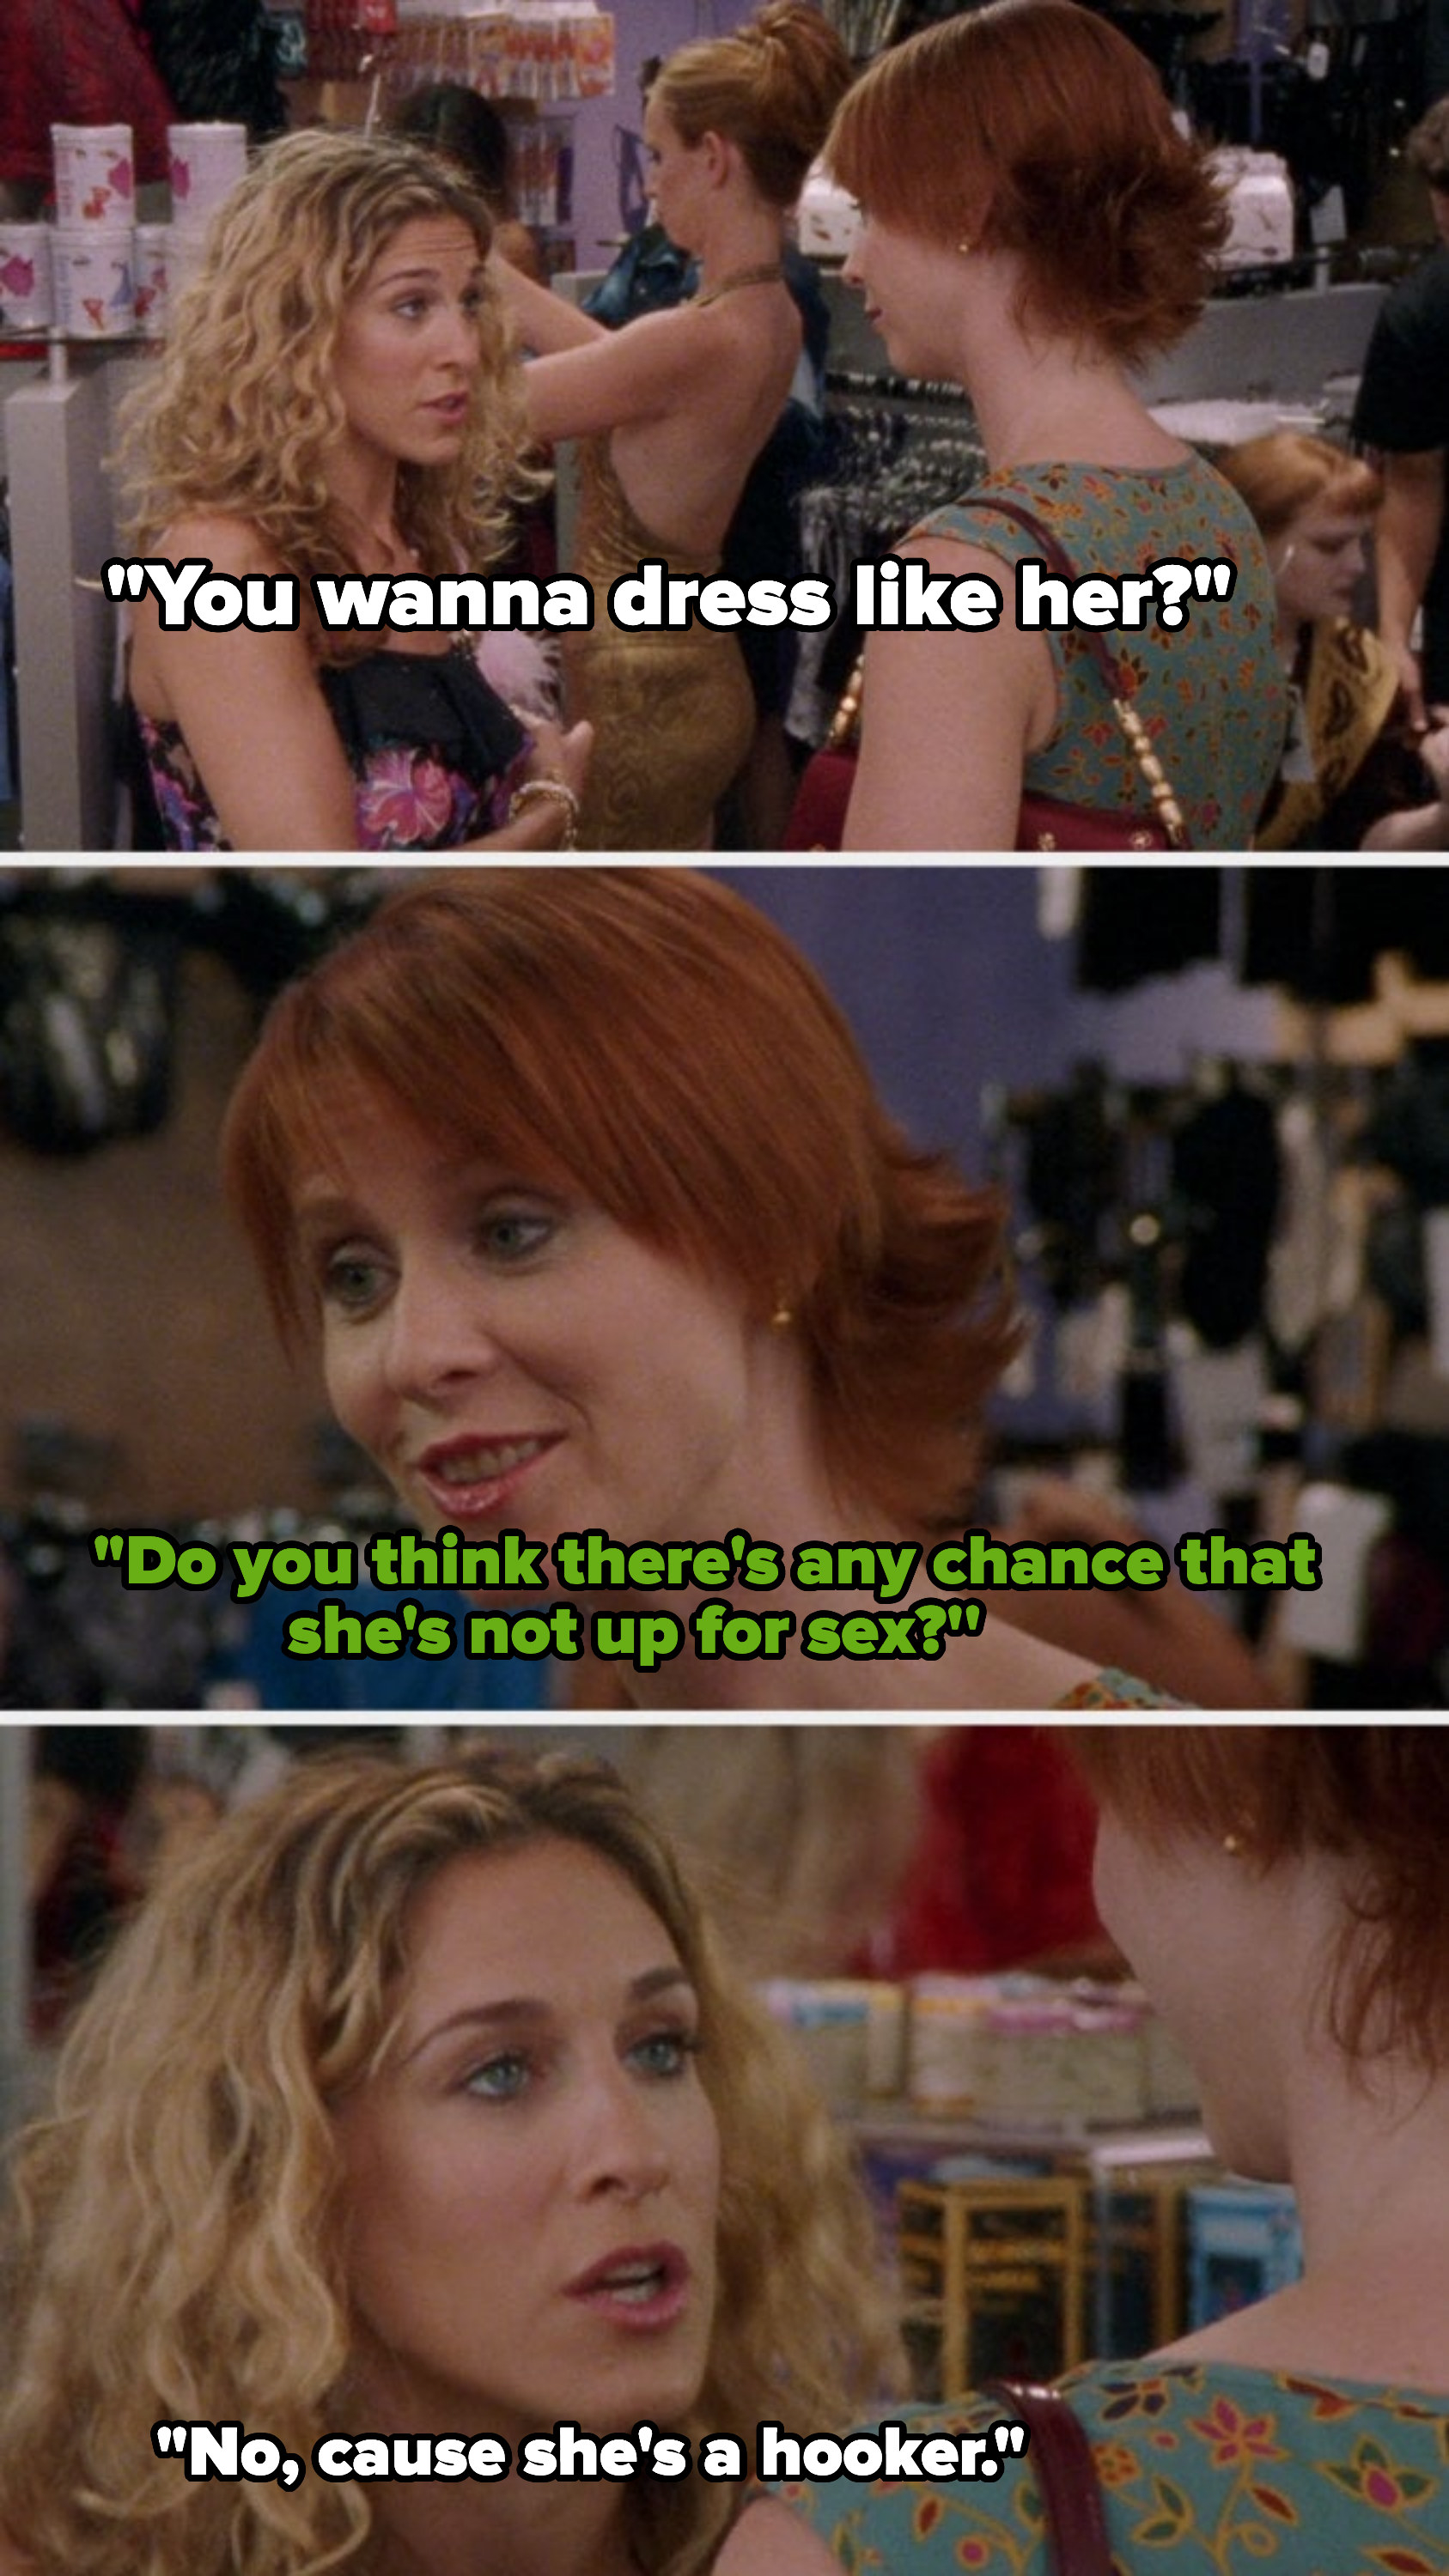 &quot;No, cause she&#x27;s a hooker.&quot;